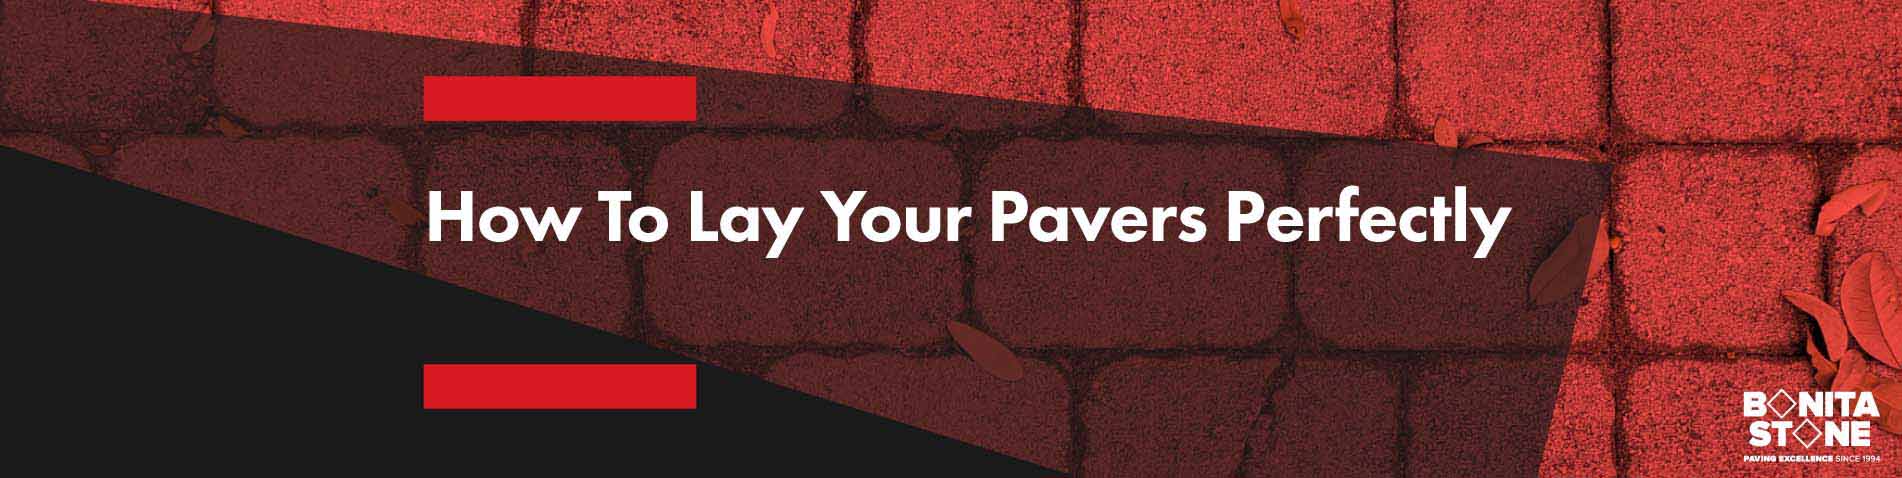 how-to-lay-your-pavers-perfectly-banner-updated